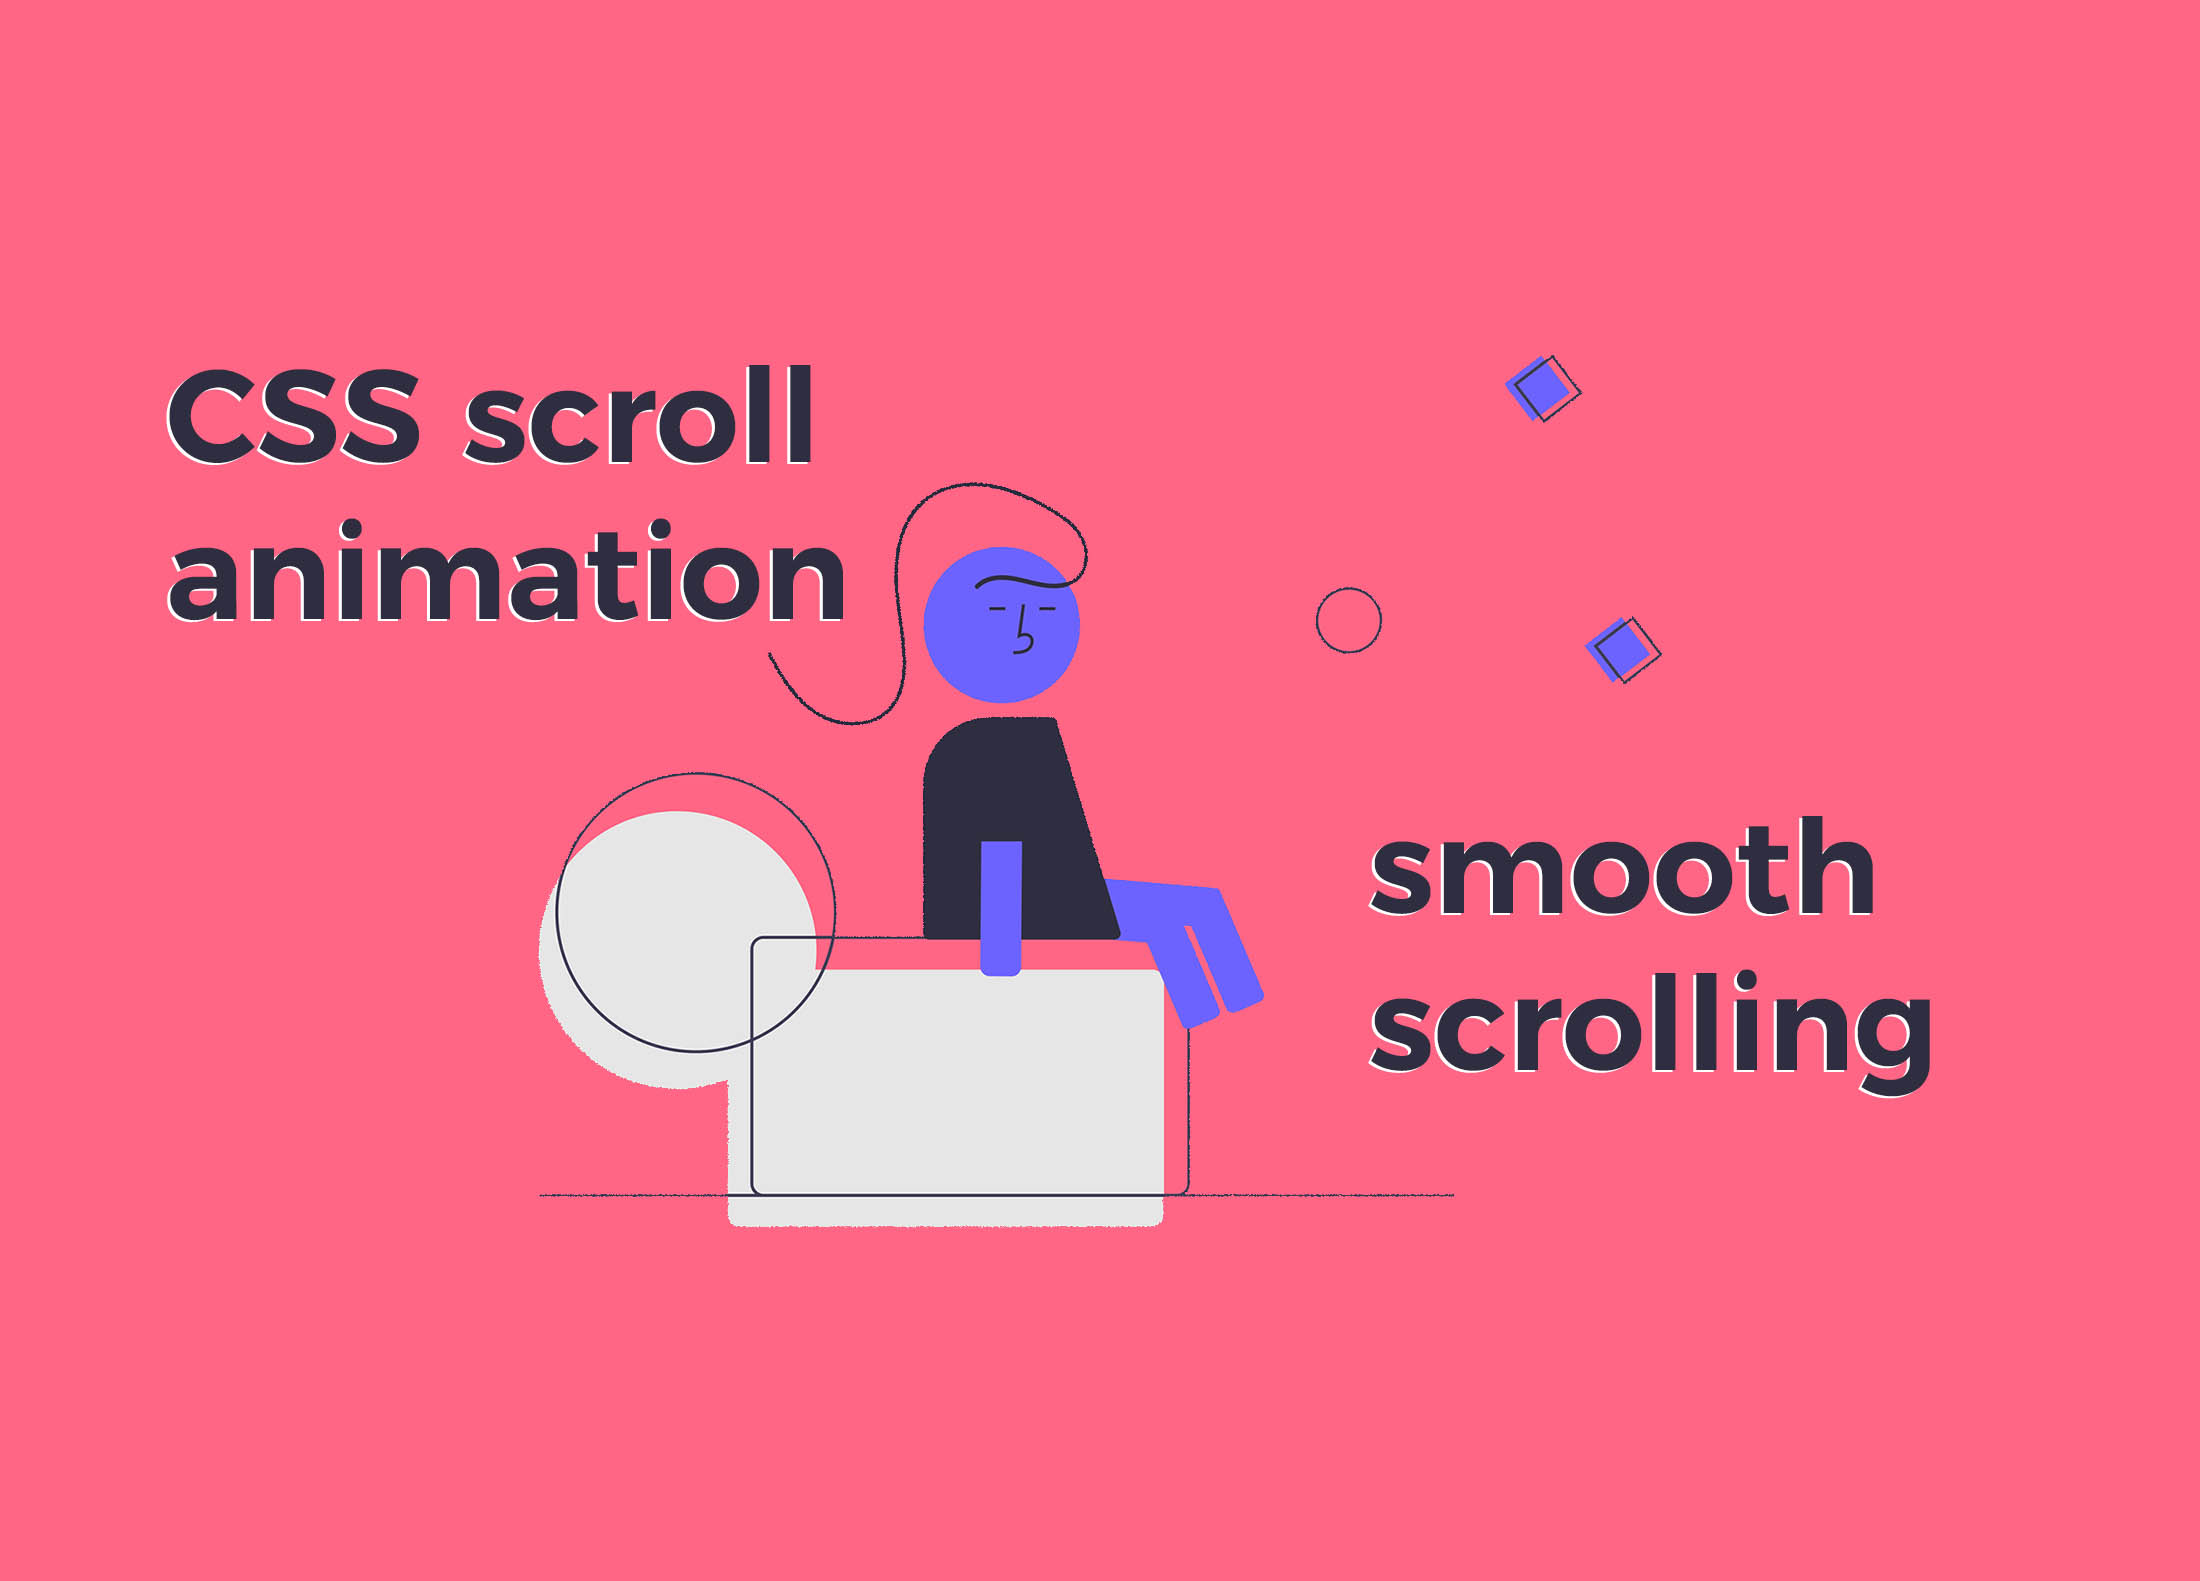 Add CSS Scroll Animation and Smooth Scrolling to a website